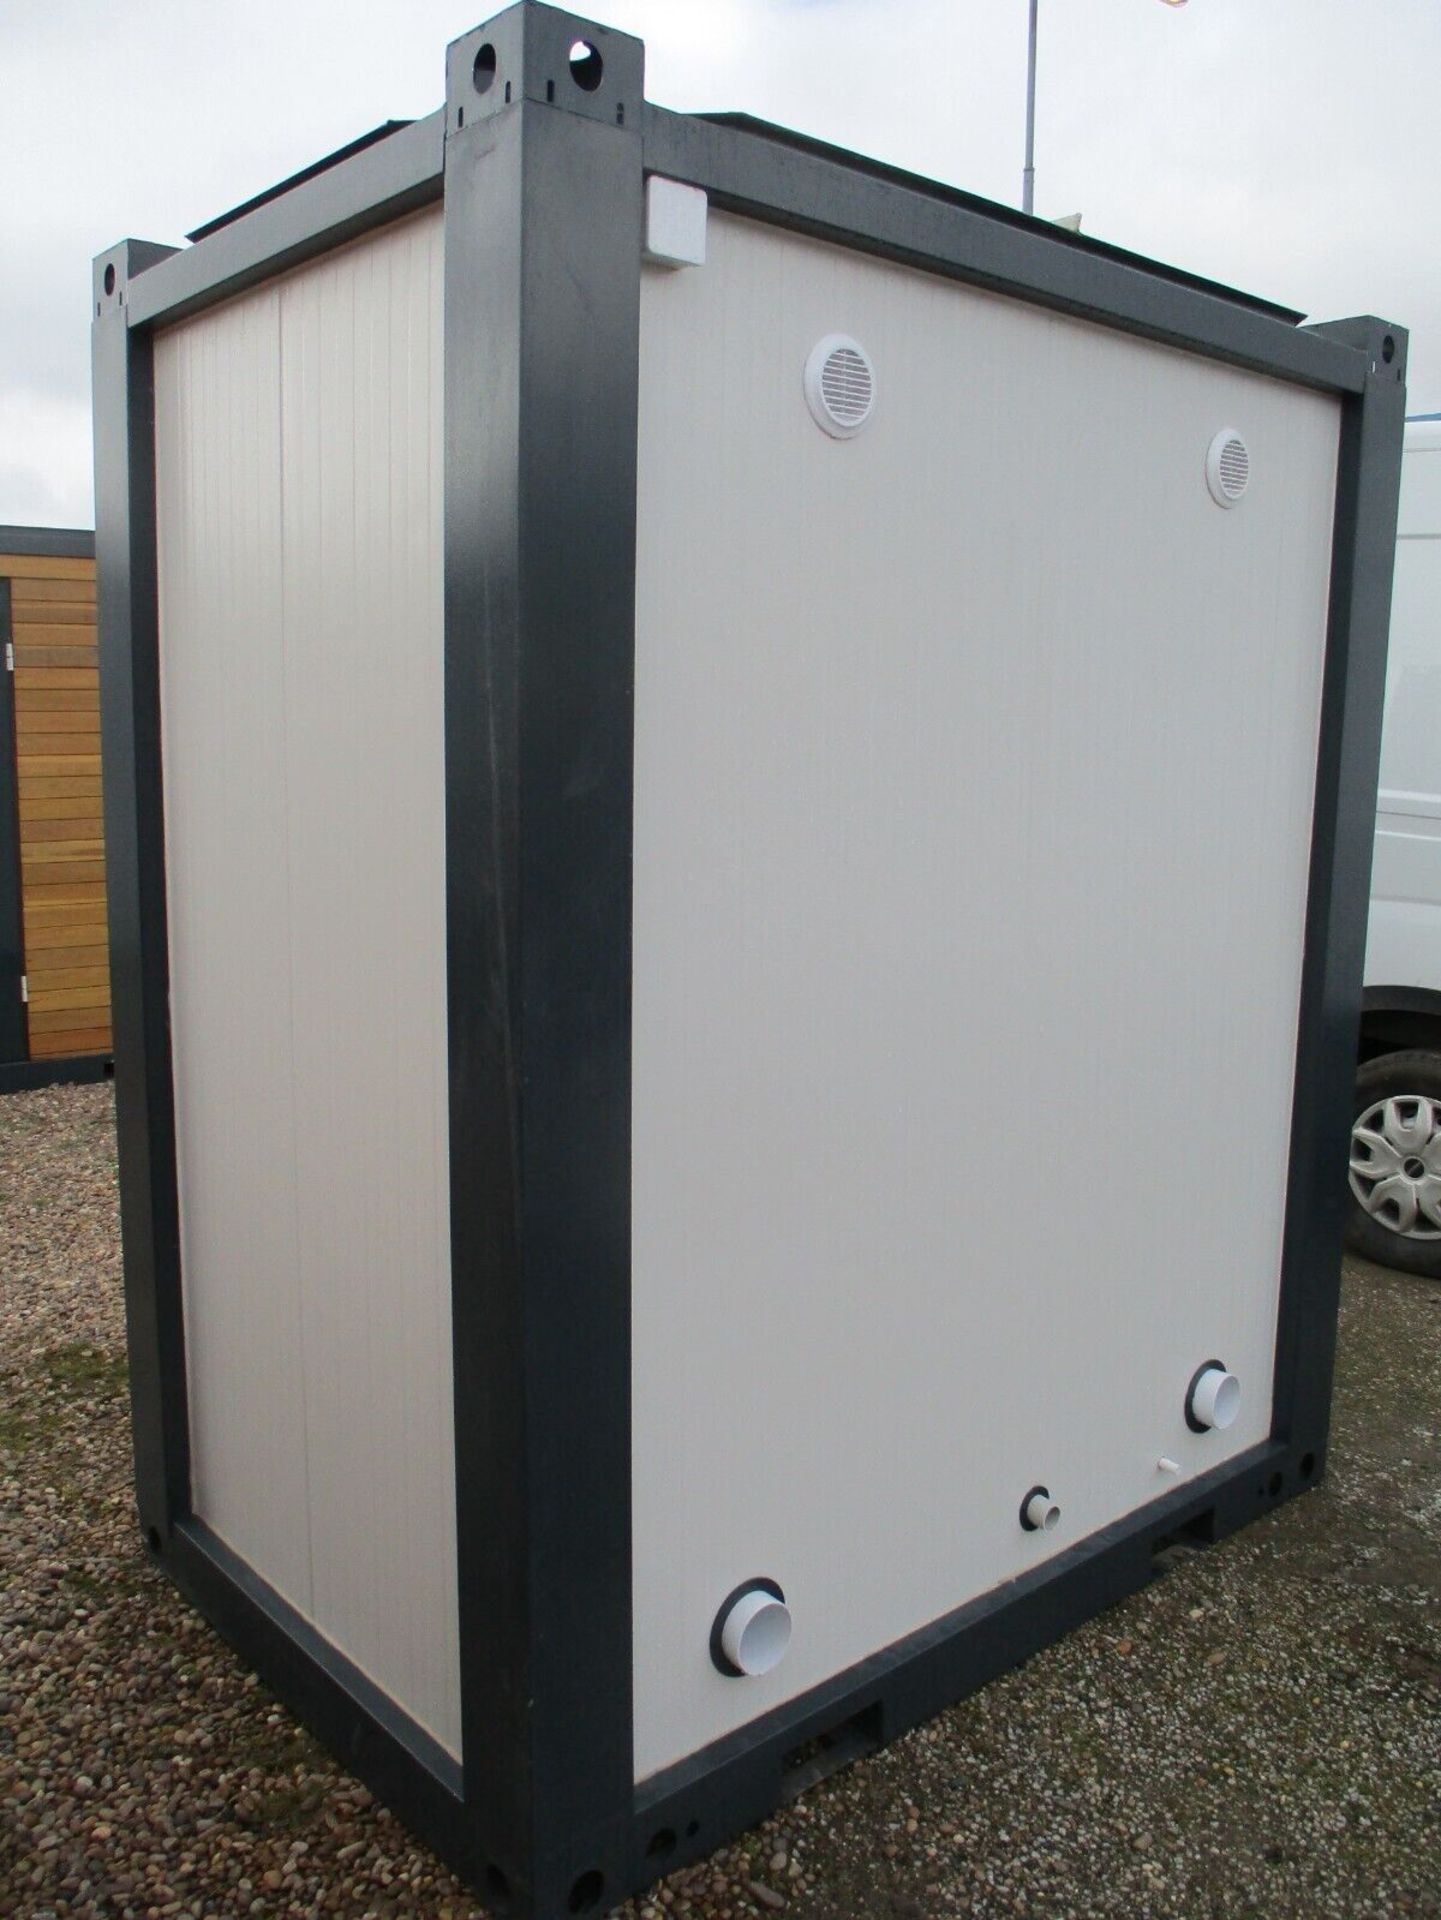 2.15M X 1.3M SHIPPING CONTAINER TOILET BLOCK